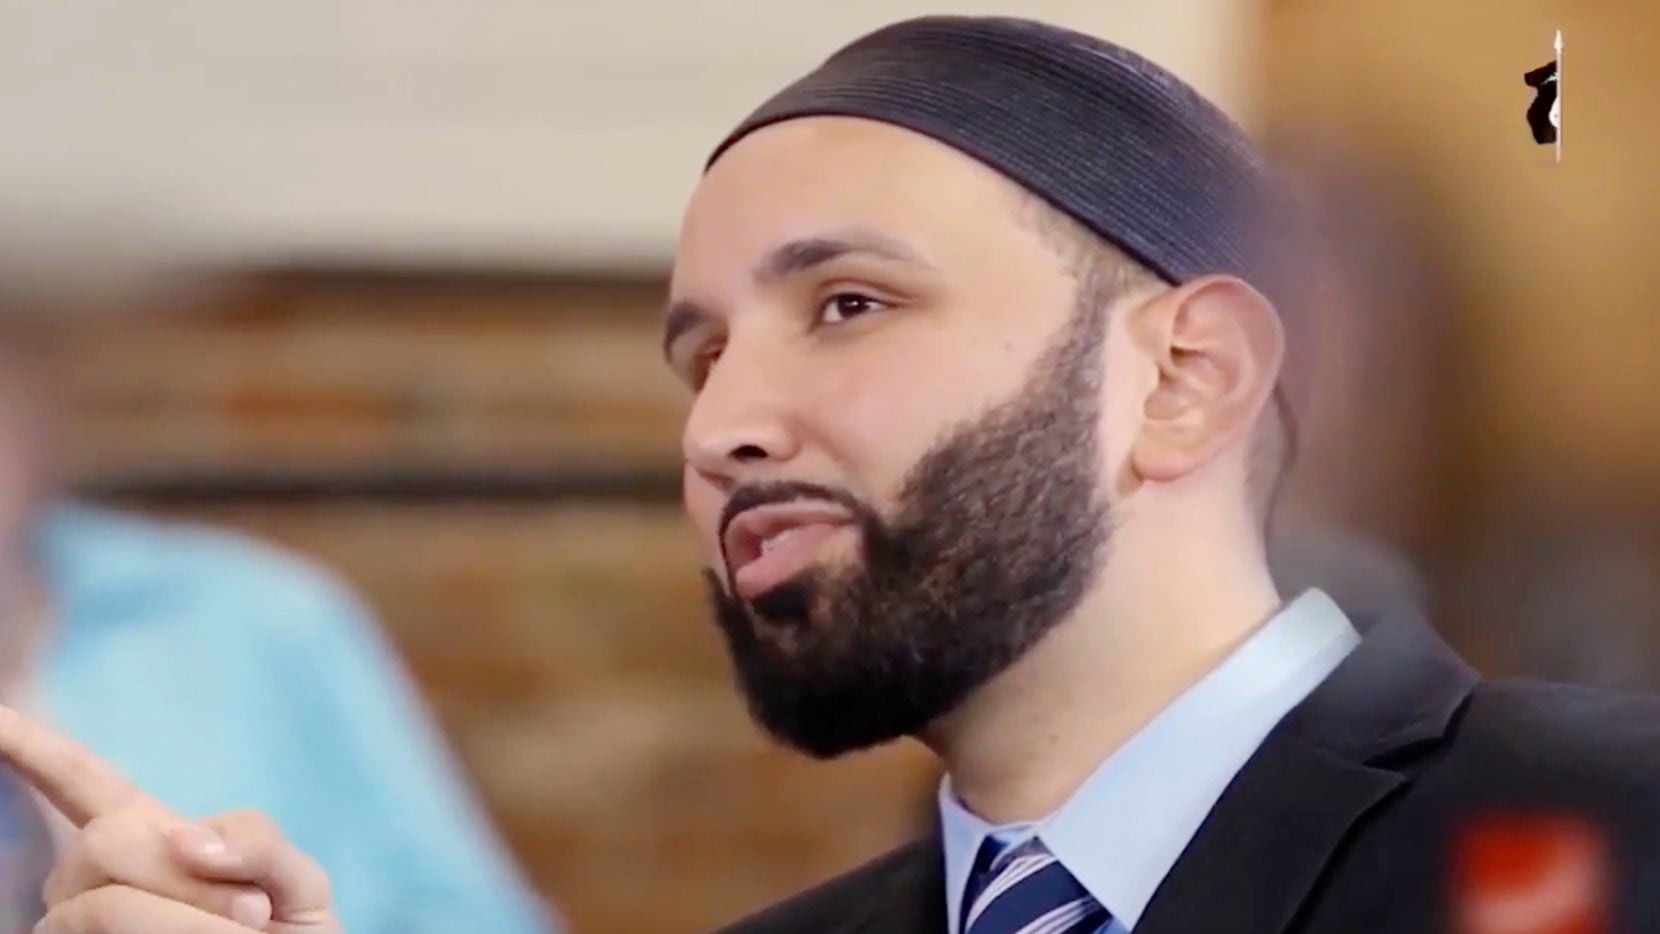 Imam Omar Suleiman was shown in an ISIS video that appeared online making threats against him and other Western imams.